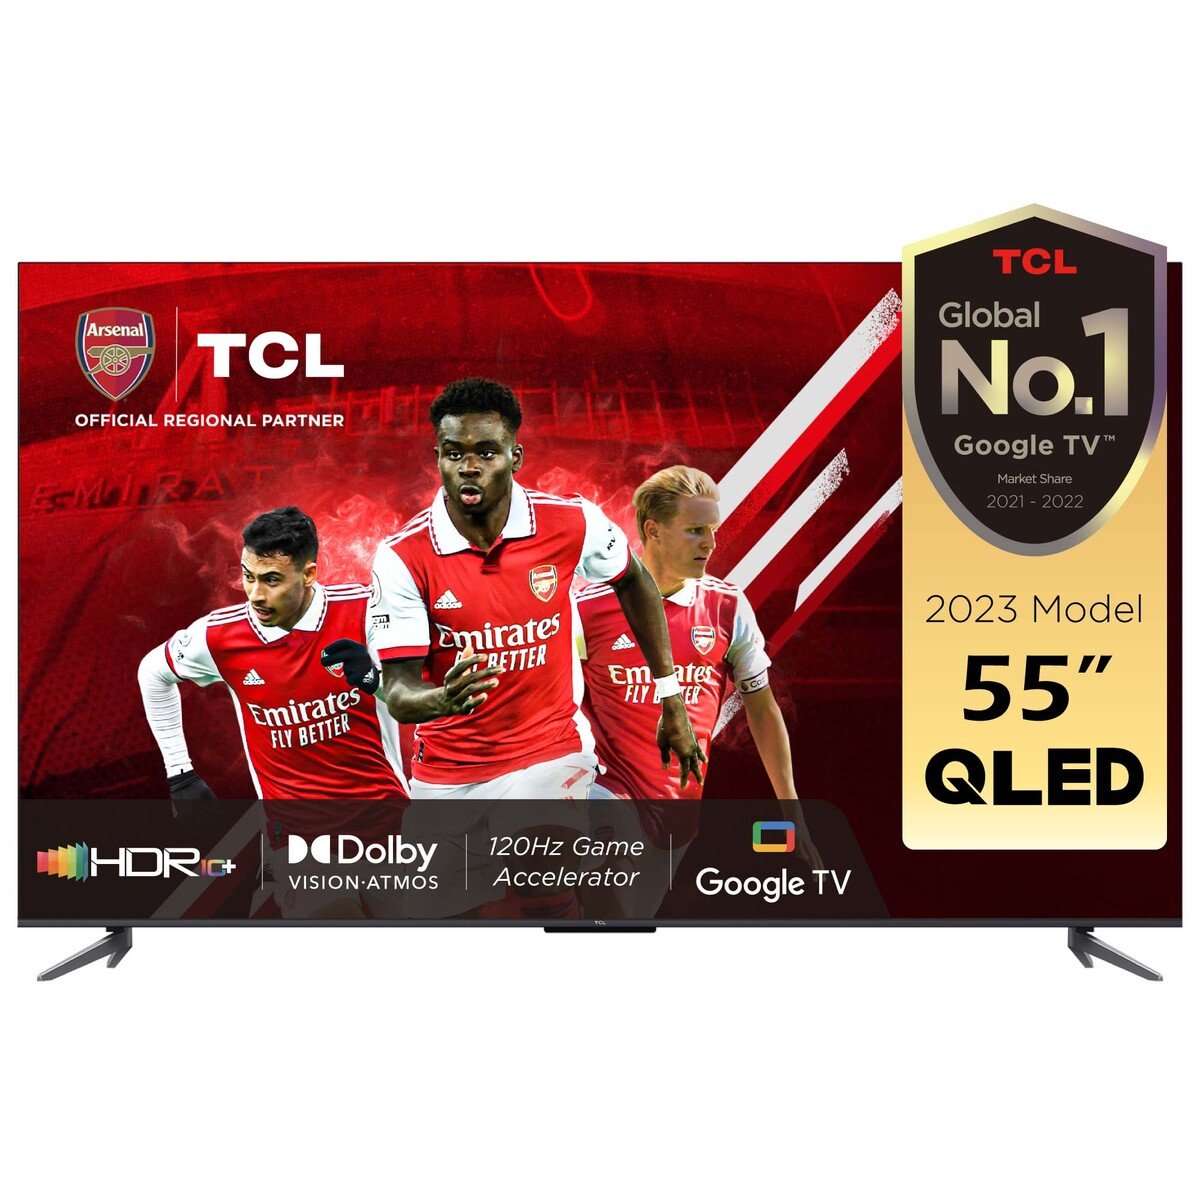 TCL Releases C645 Color Master QLED TV